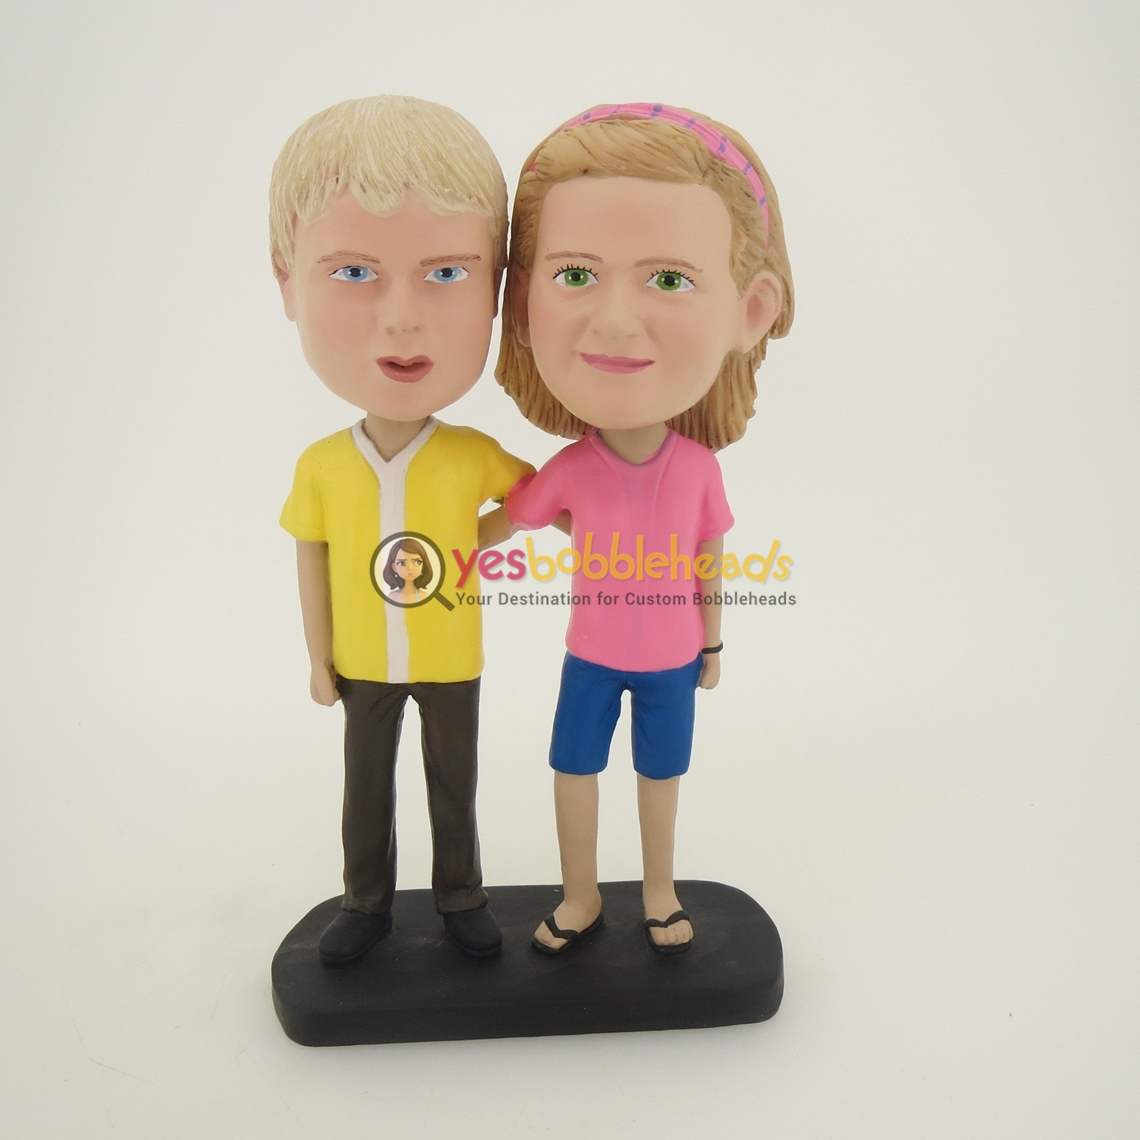 Picture of Custom Bobblehead Doll: Arm Behind Each Other Young Couple